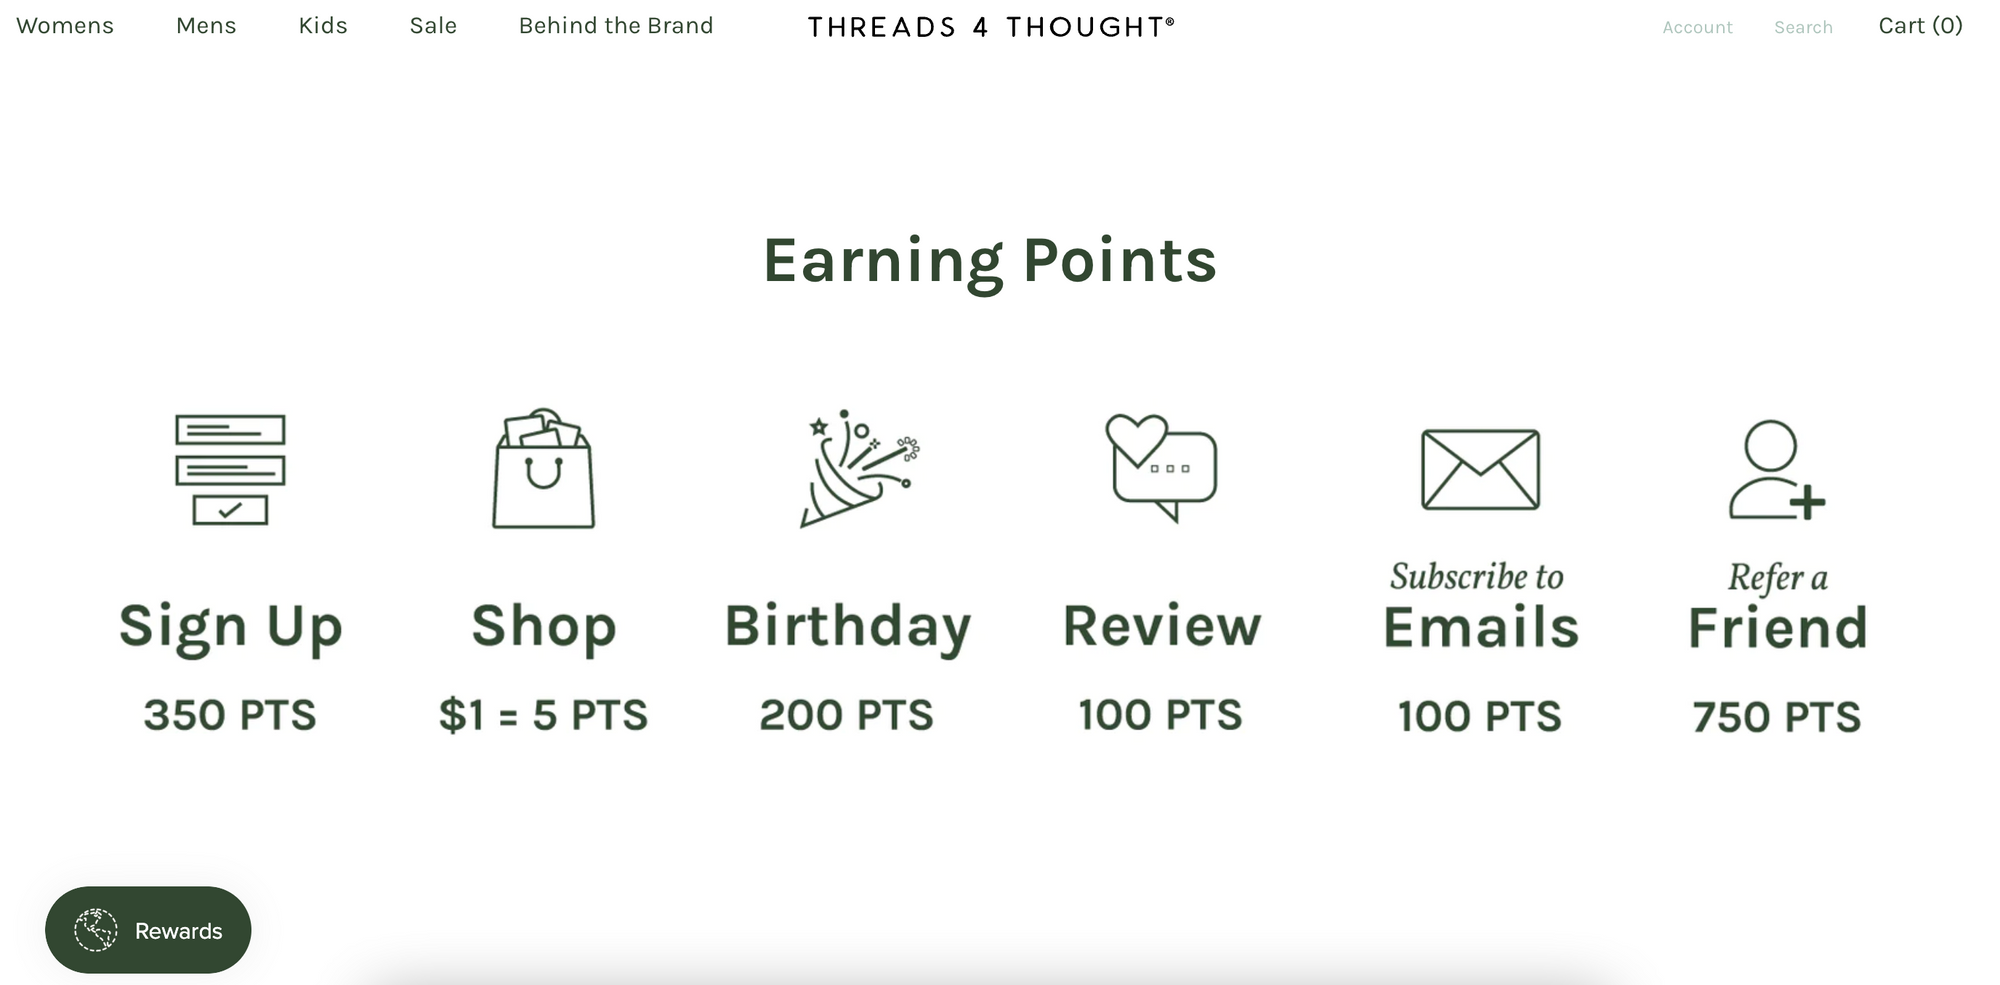 screenshot of rewards page for threads 4 thoughts